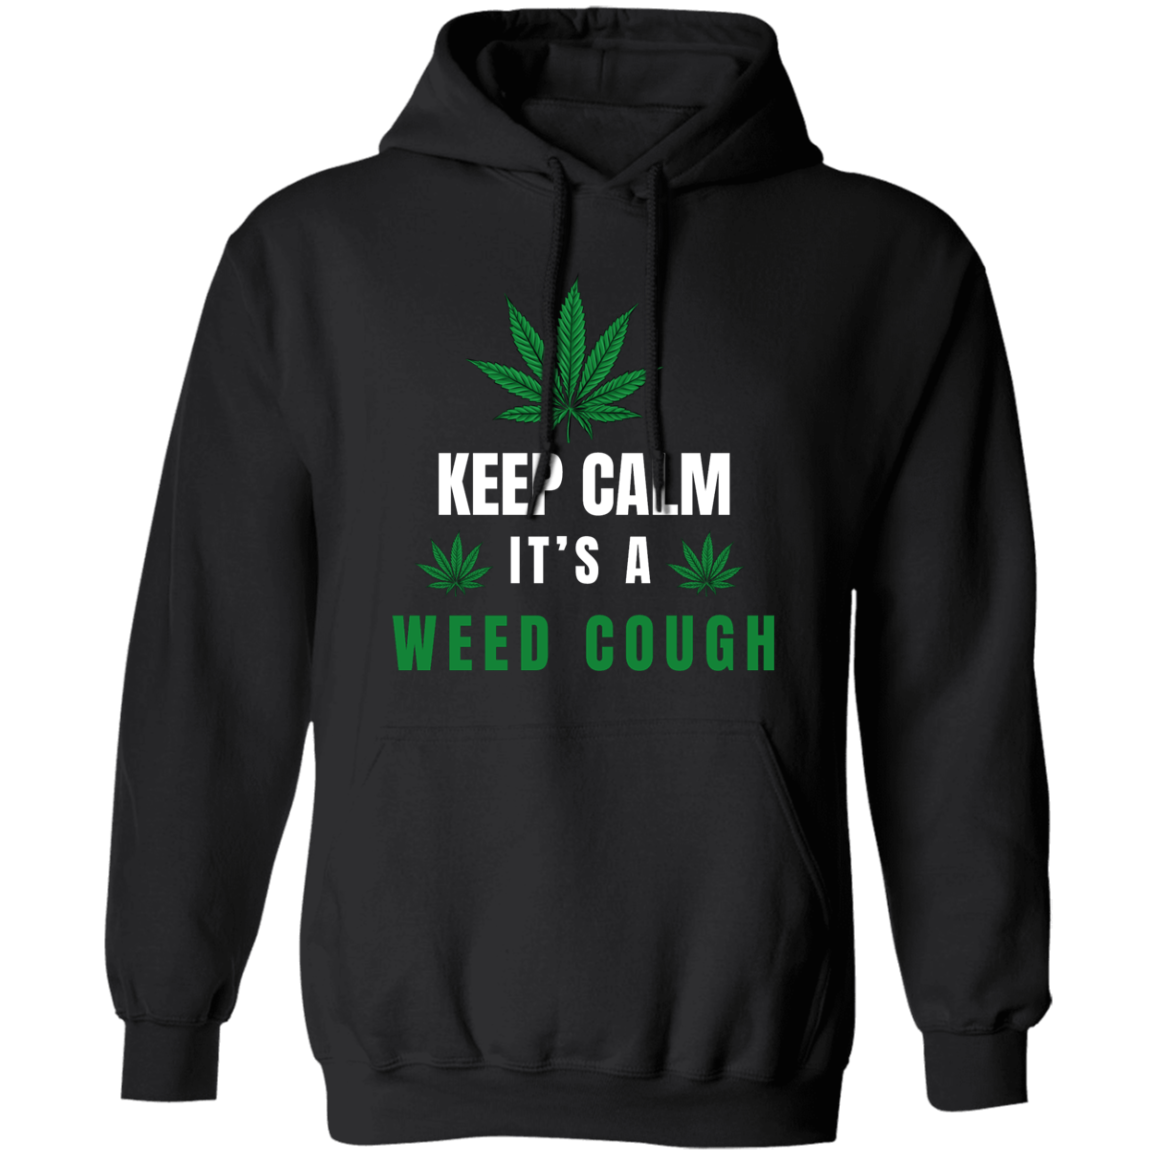 Keep Calm It's A Weed Cough Funny Pullover Hoodie